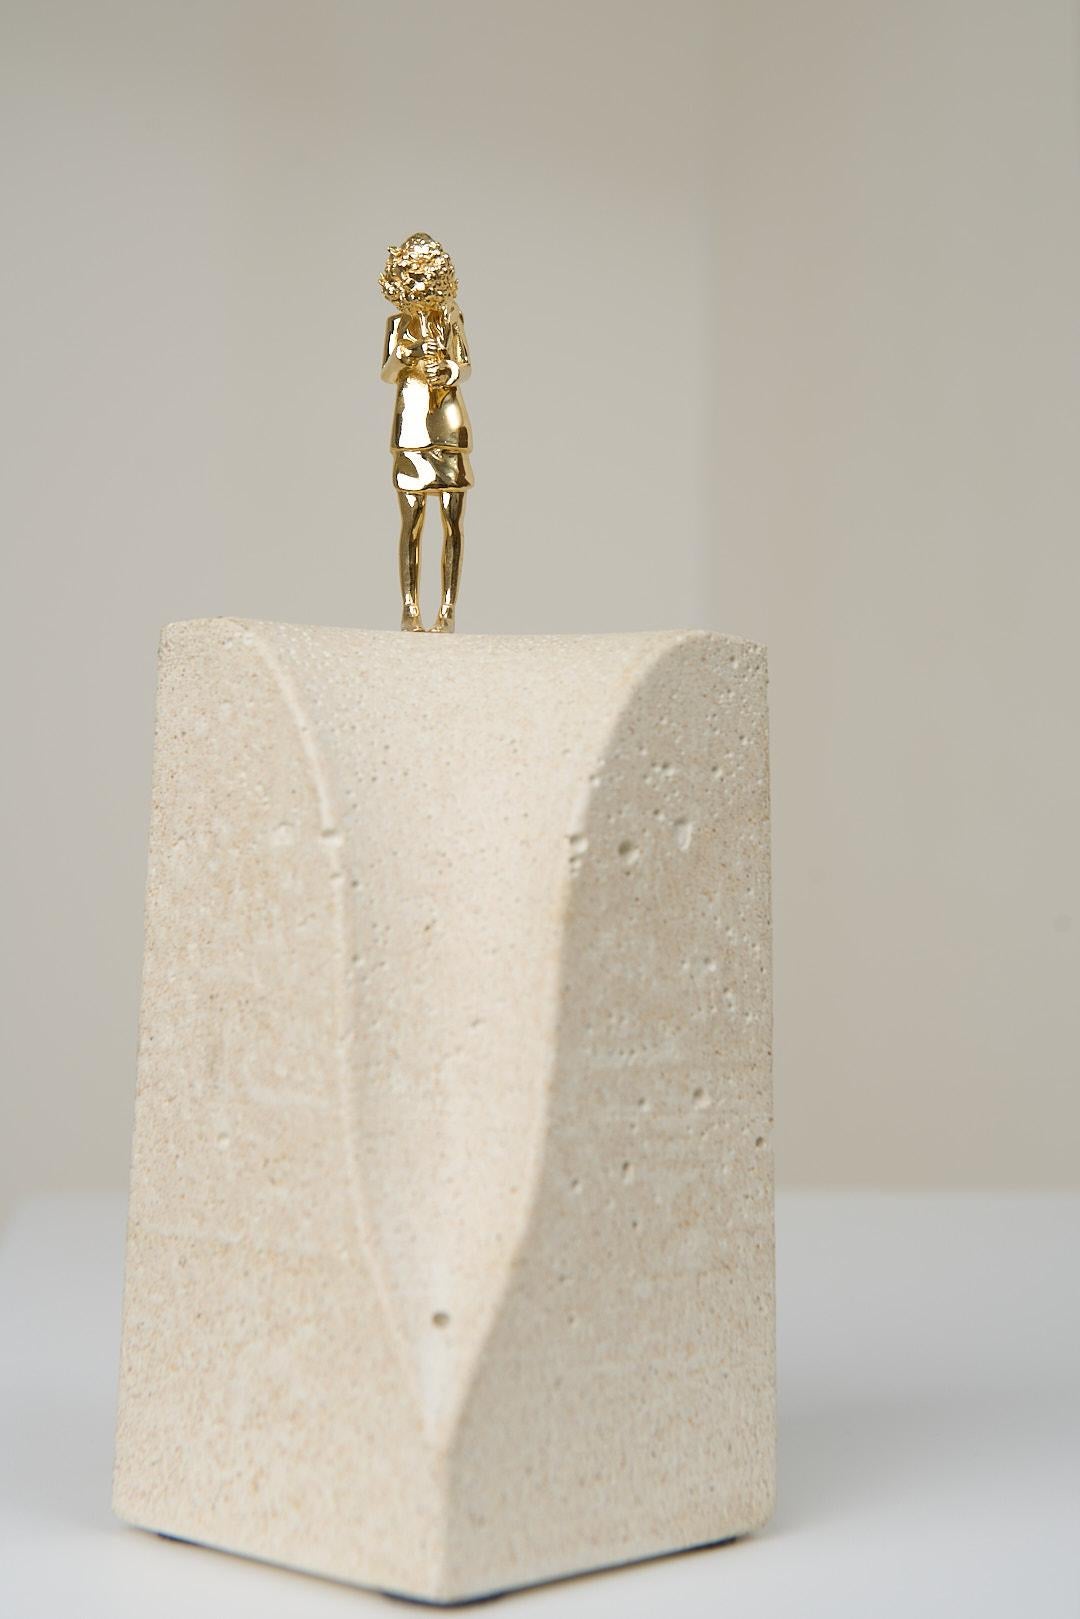 Sinestesia Series, Concrete and Brass Girl Sculpture N3 For Sale 6